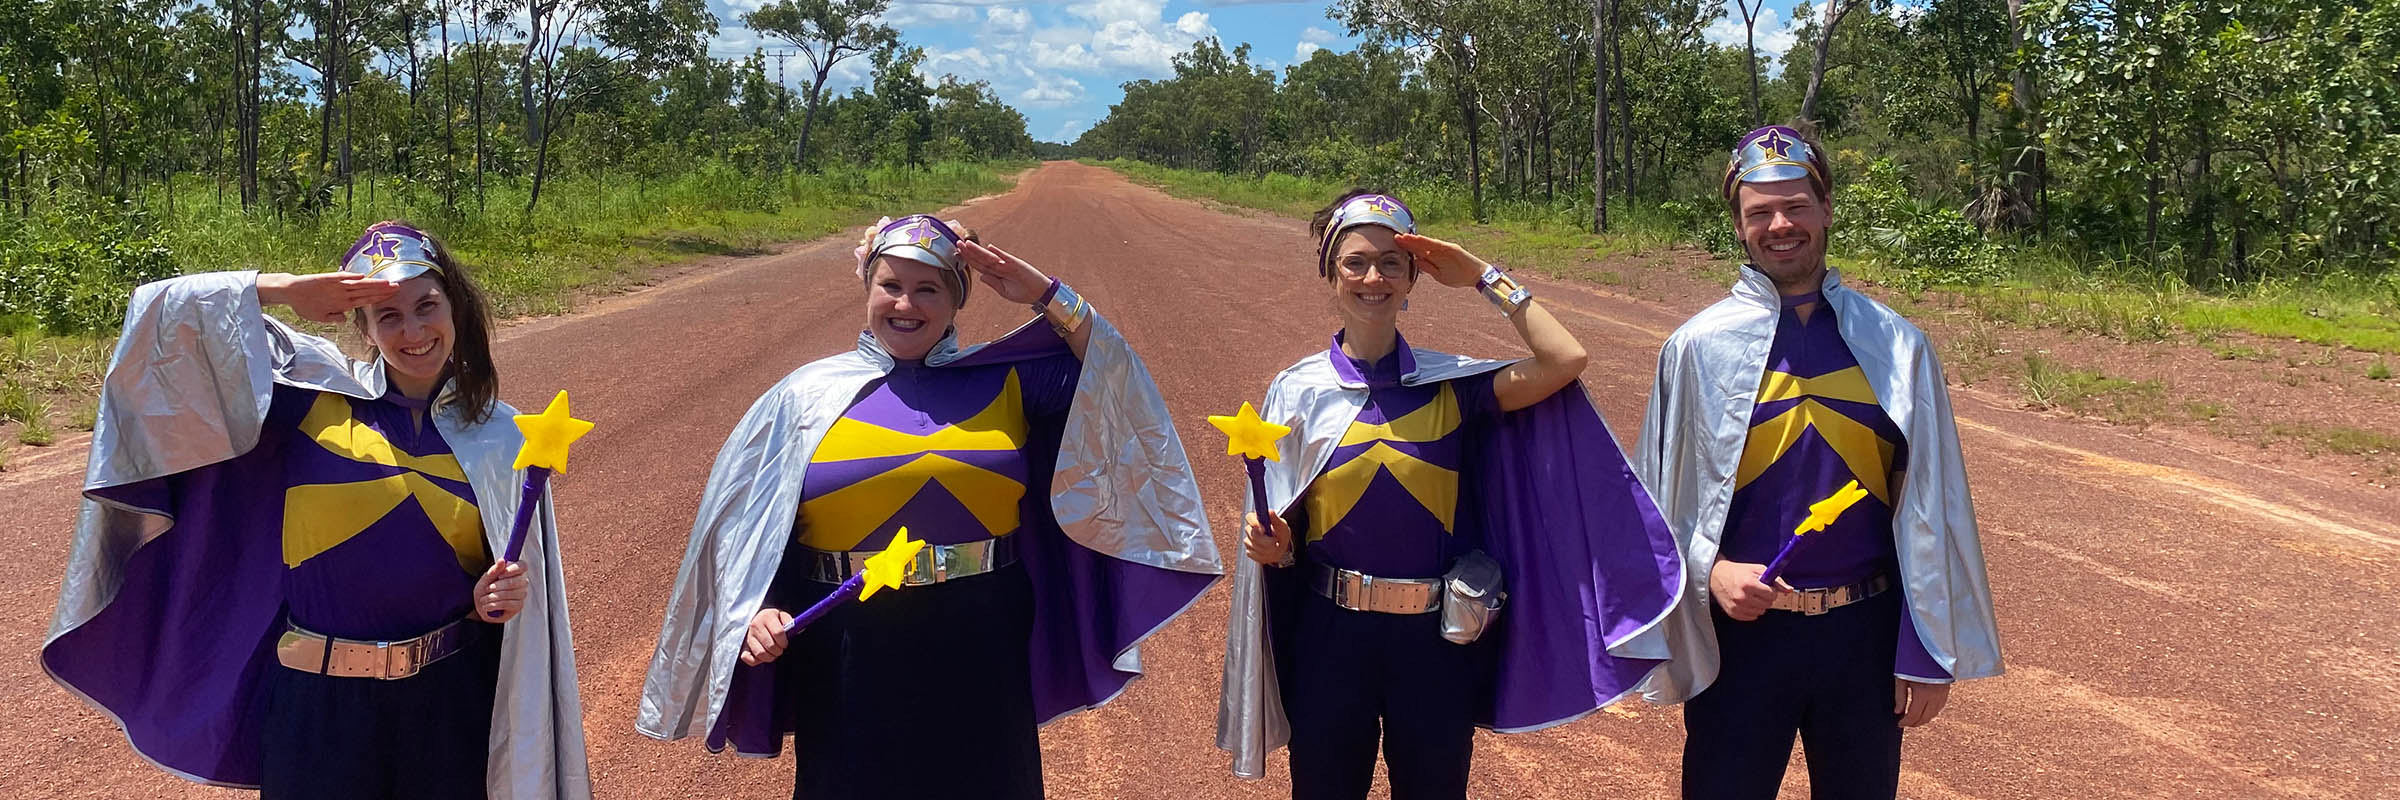 Starlight will receive $100,000 to support kids in remote communities Hero Image